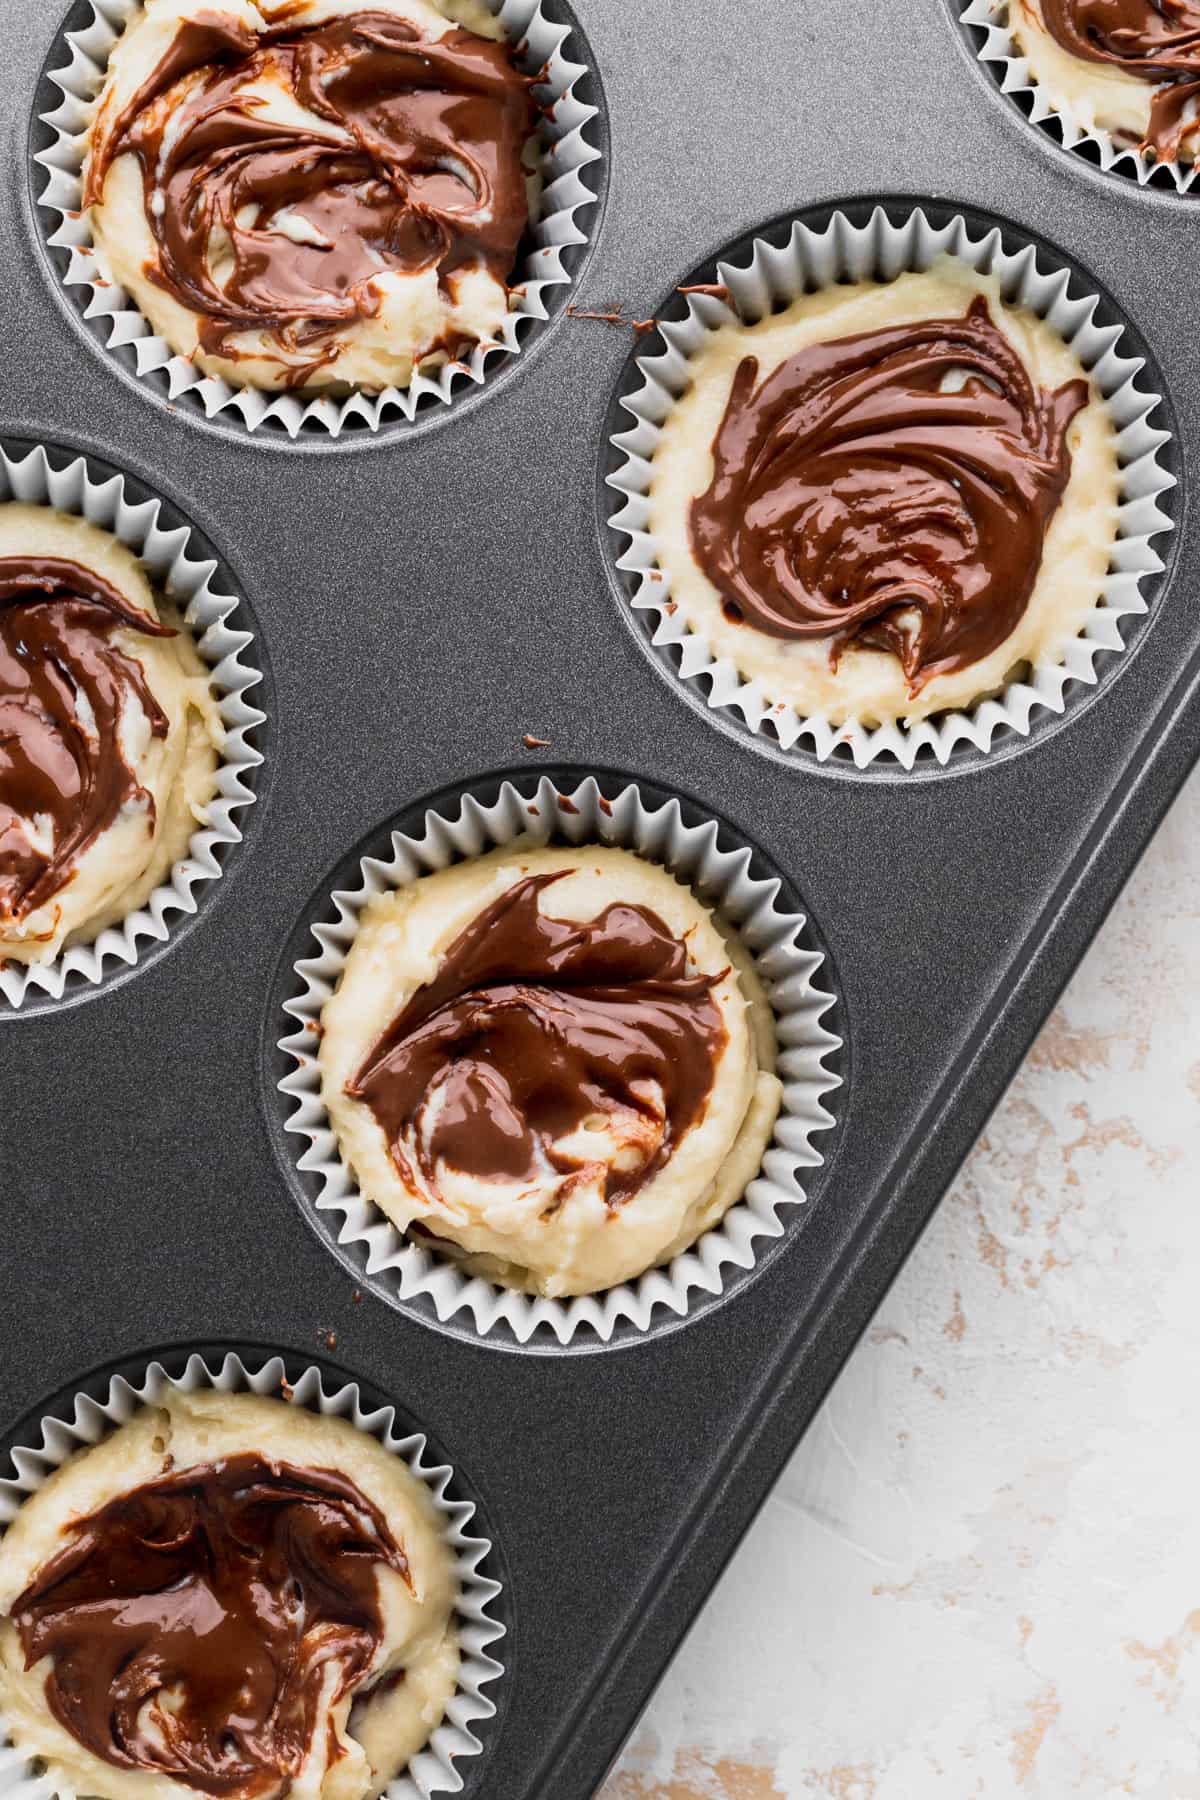 Nutella swirled on top of cupcake batter.